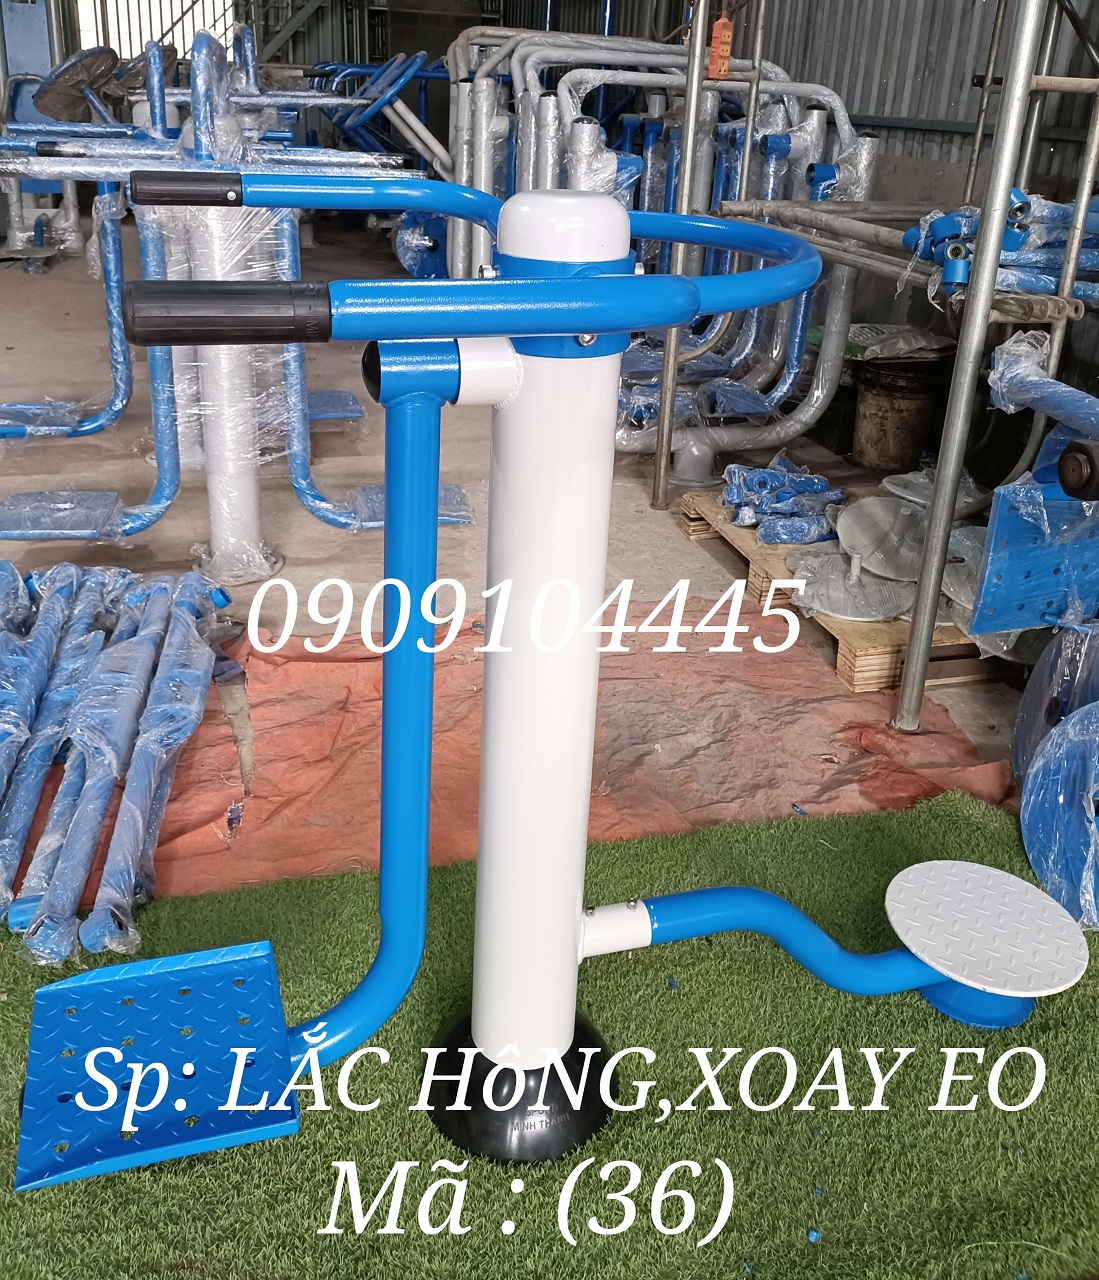 Dụng cụ 2 trong 1 . Lắc eo - xoay eo